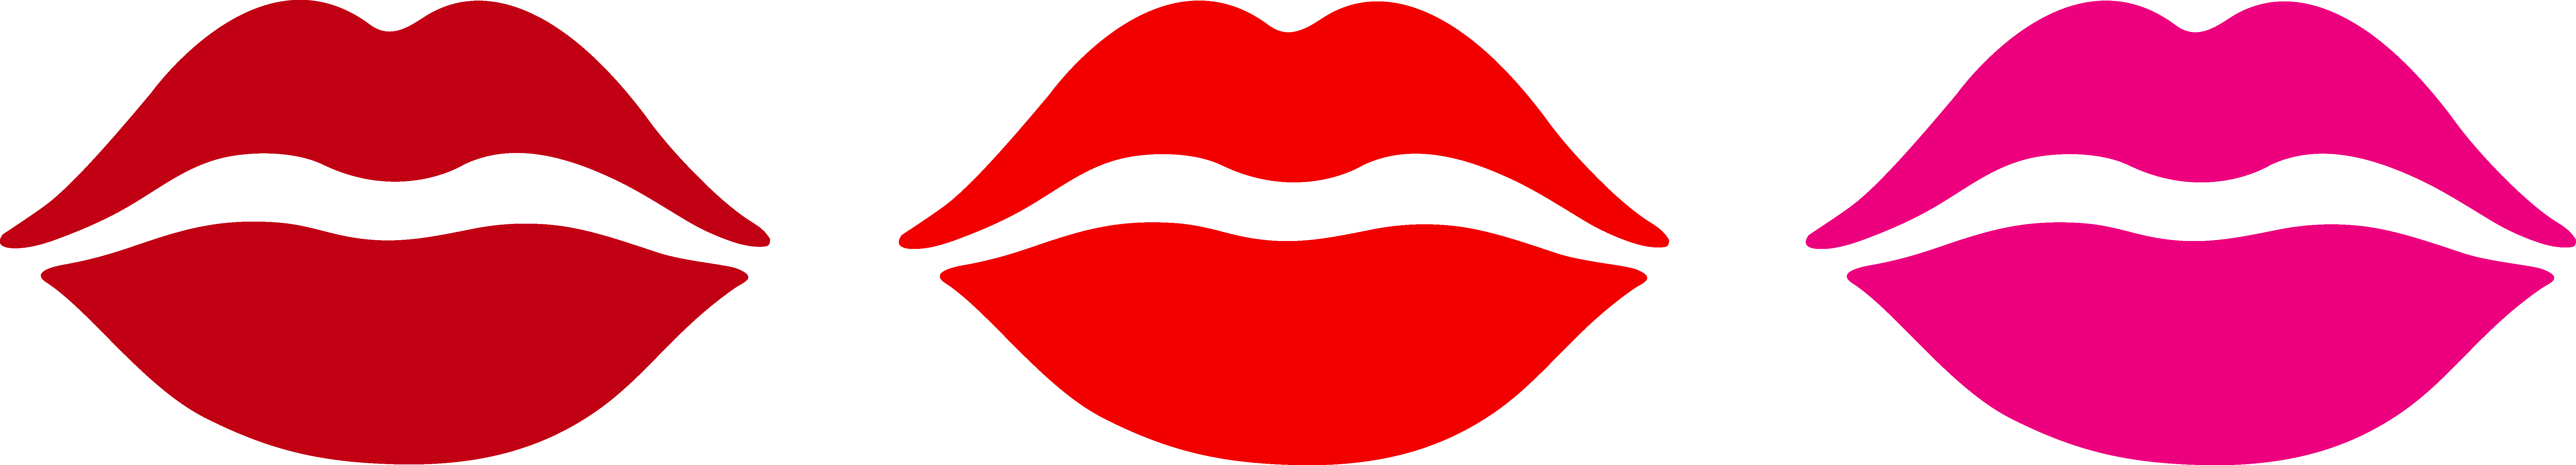 Pictures of cartoon lips free download clip art